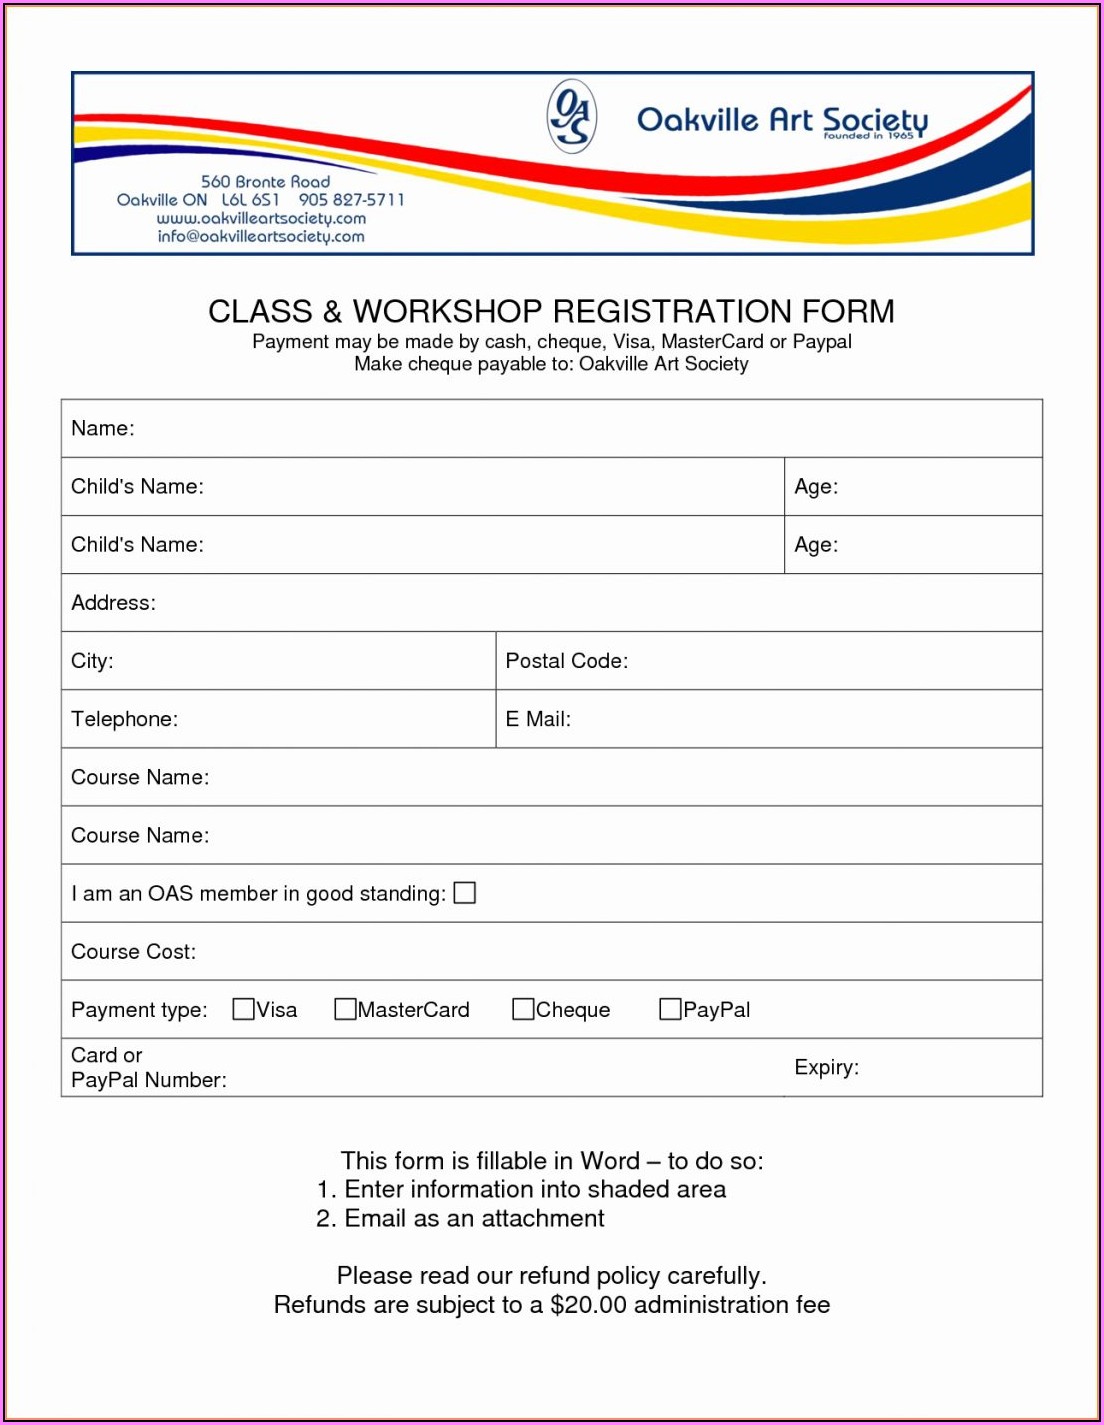 Job Application Form Template Word Download